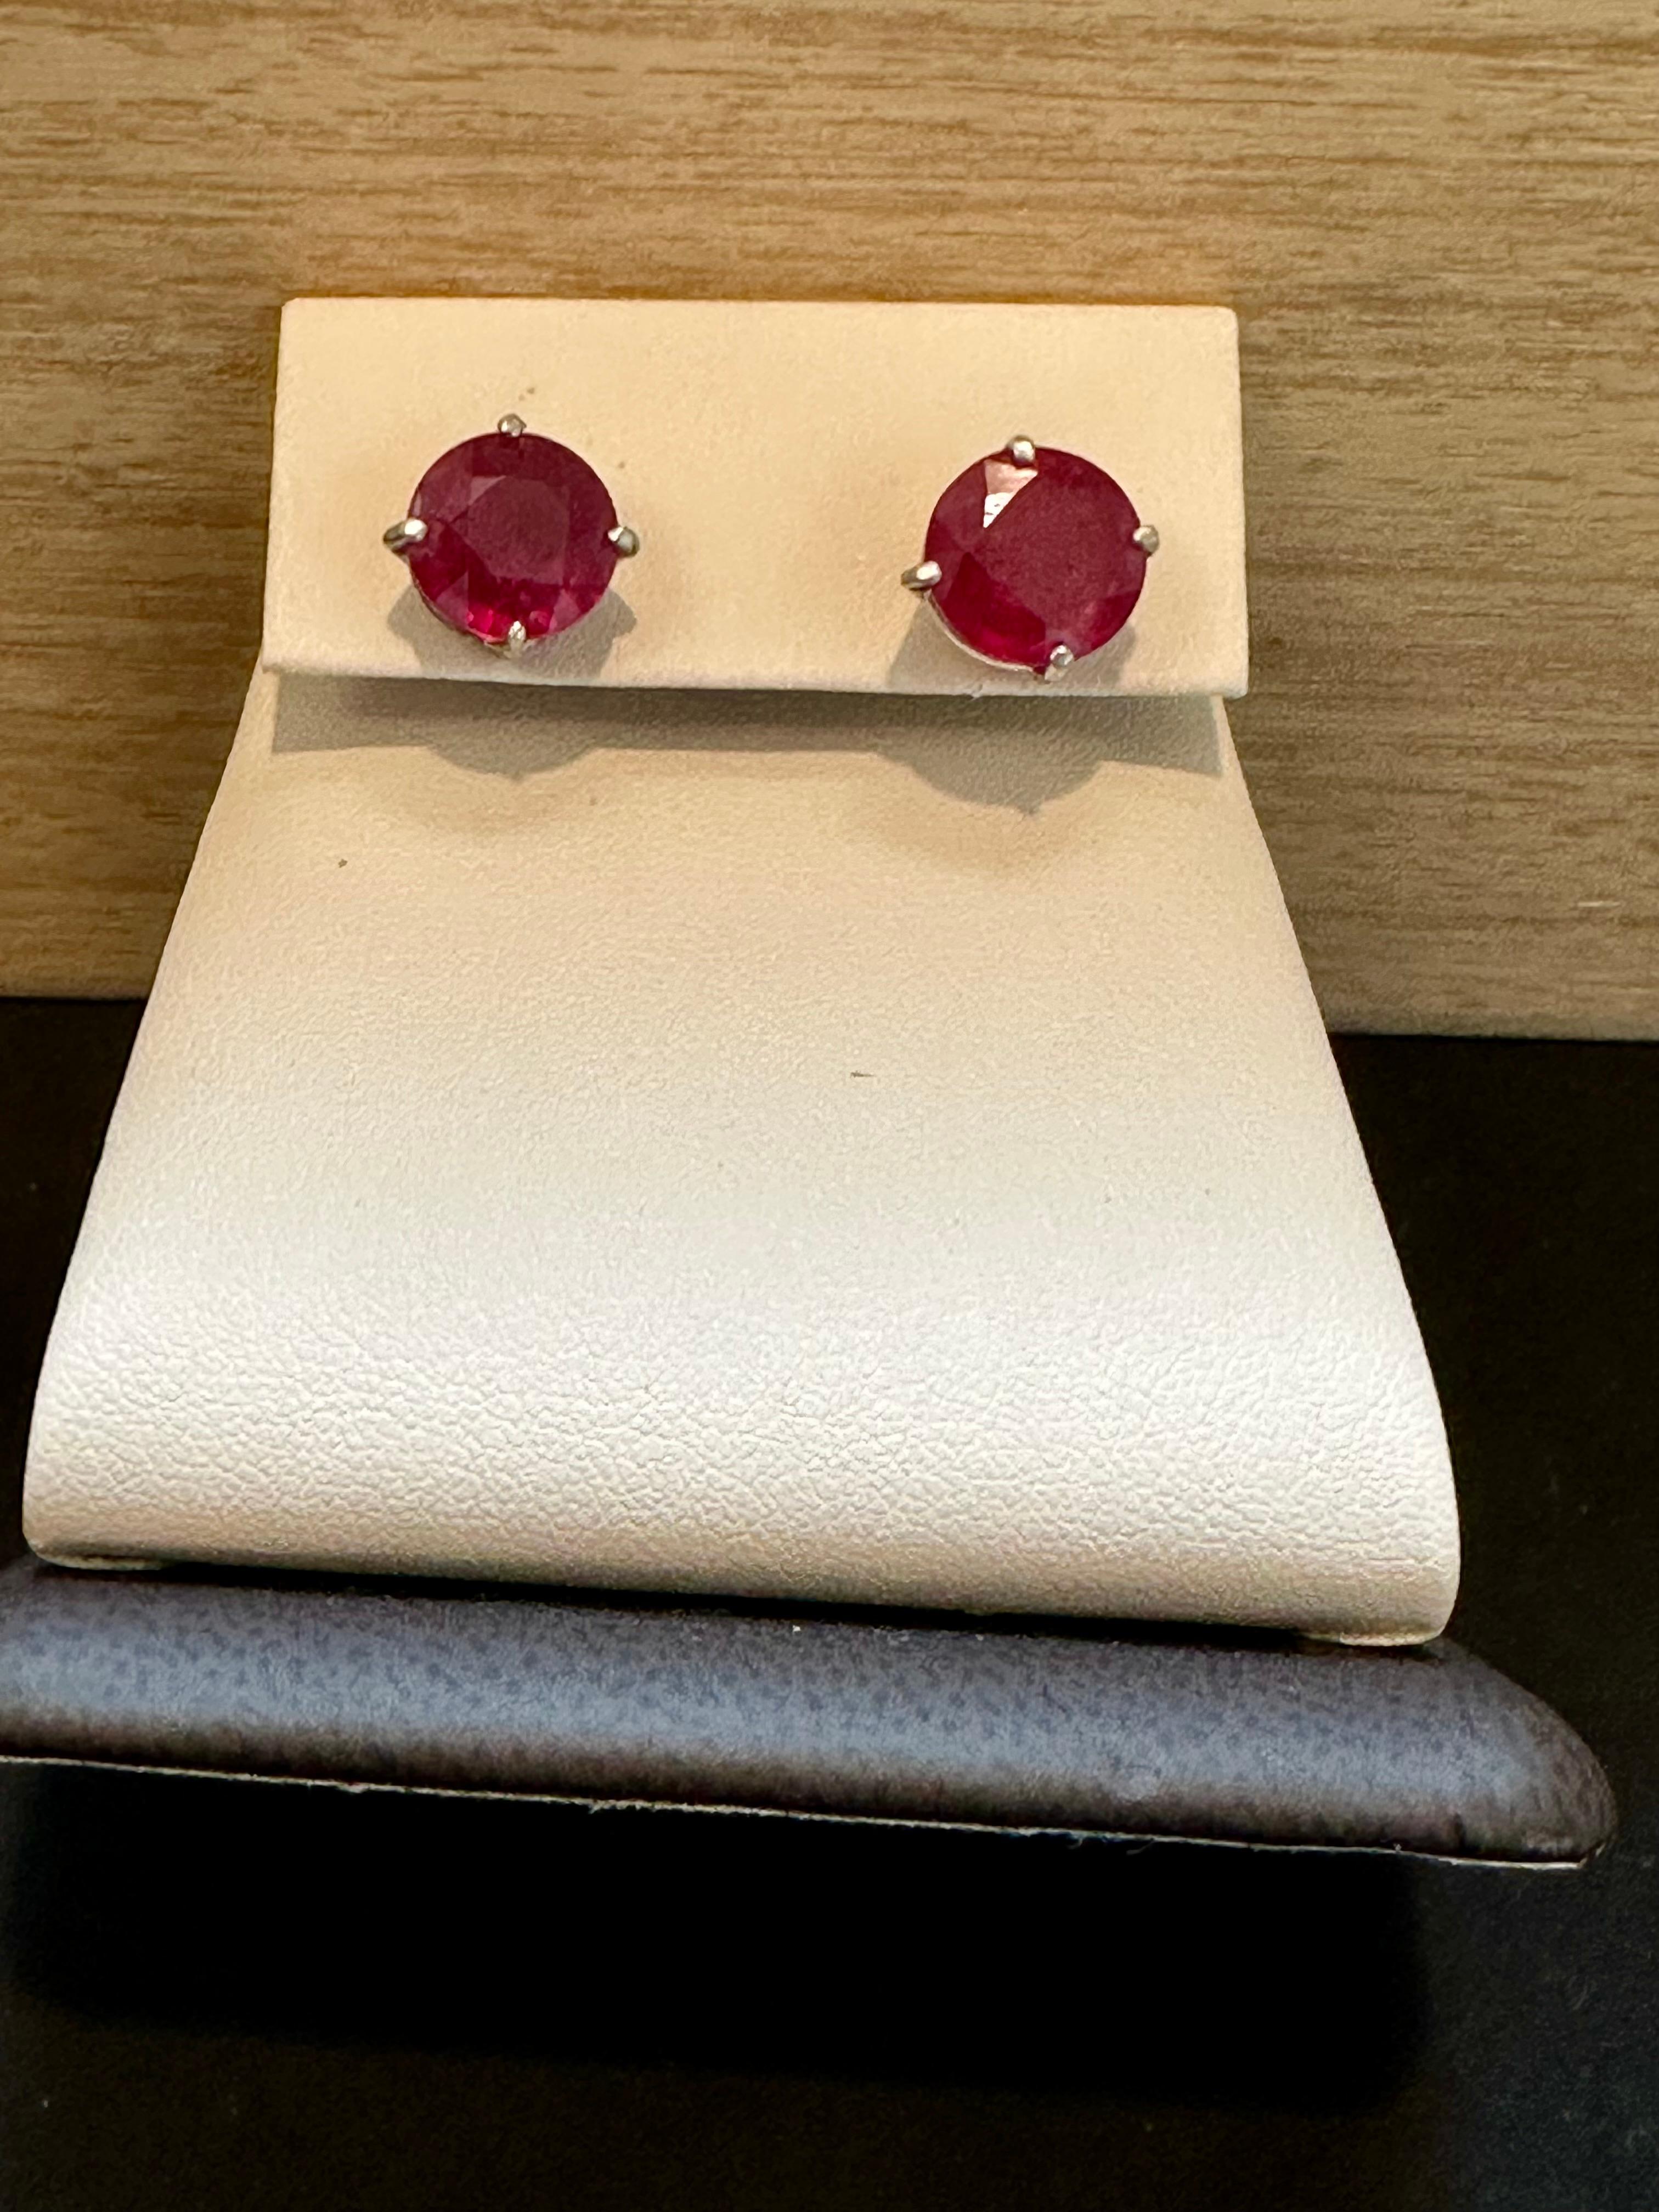 6 Carat Solitaire Treated Ruby Earrings 4 Prongs Screw Back 14 Karat White Gold 6